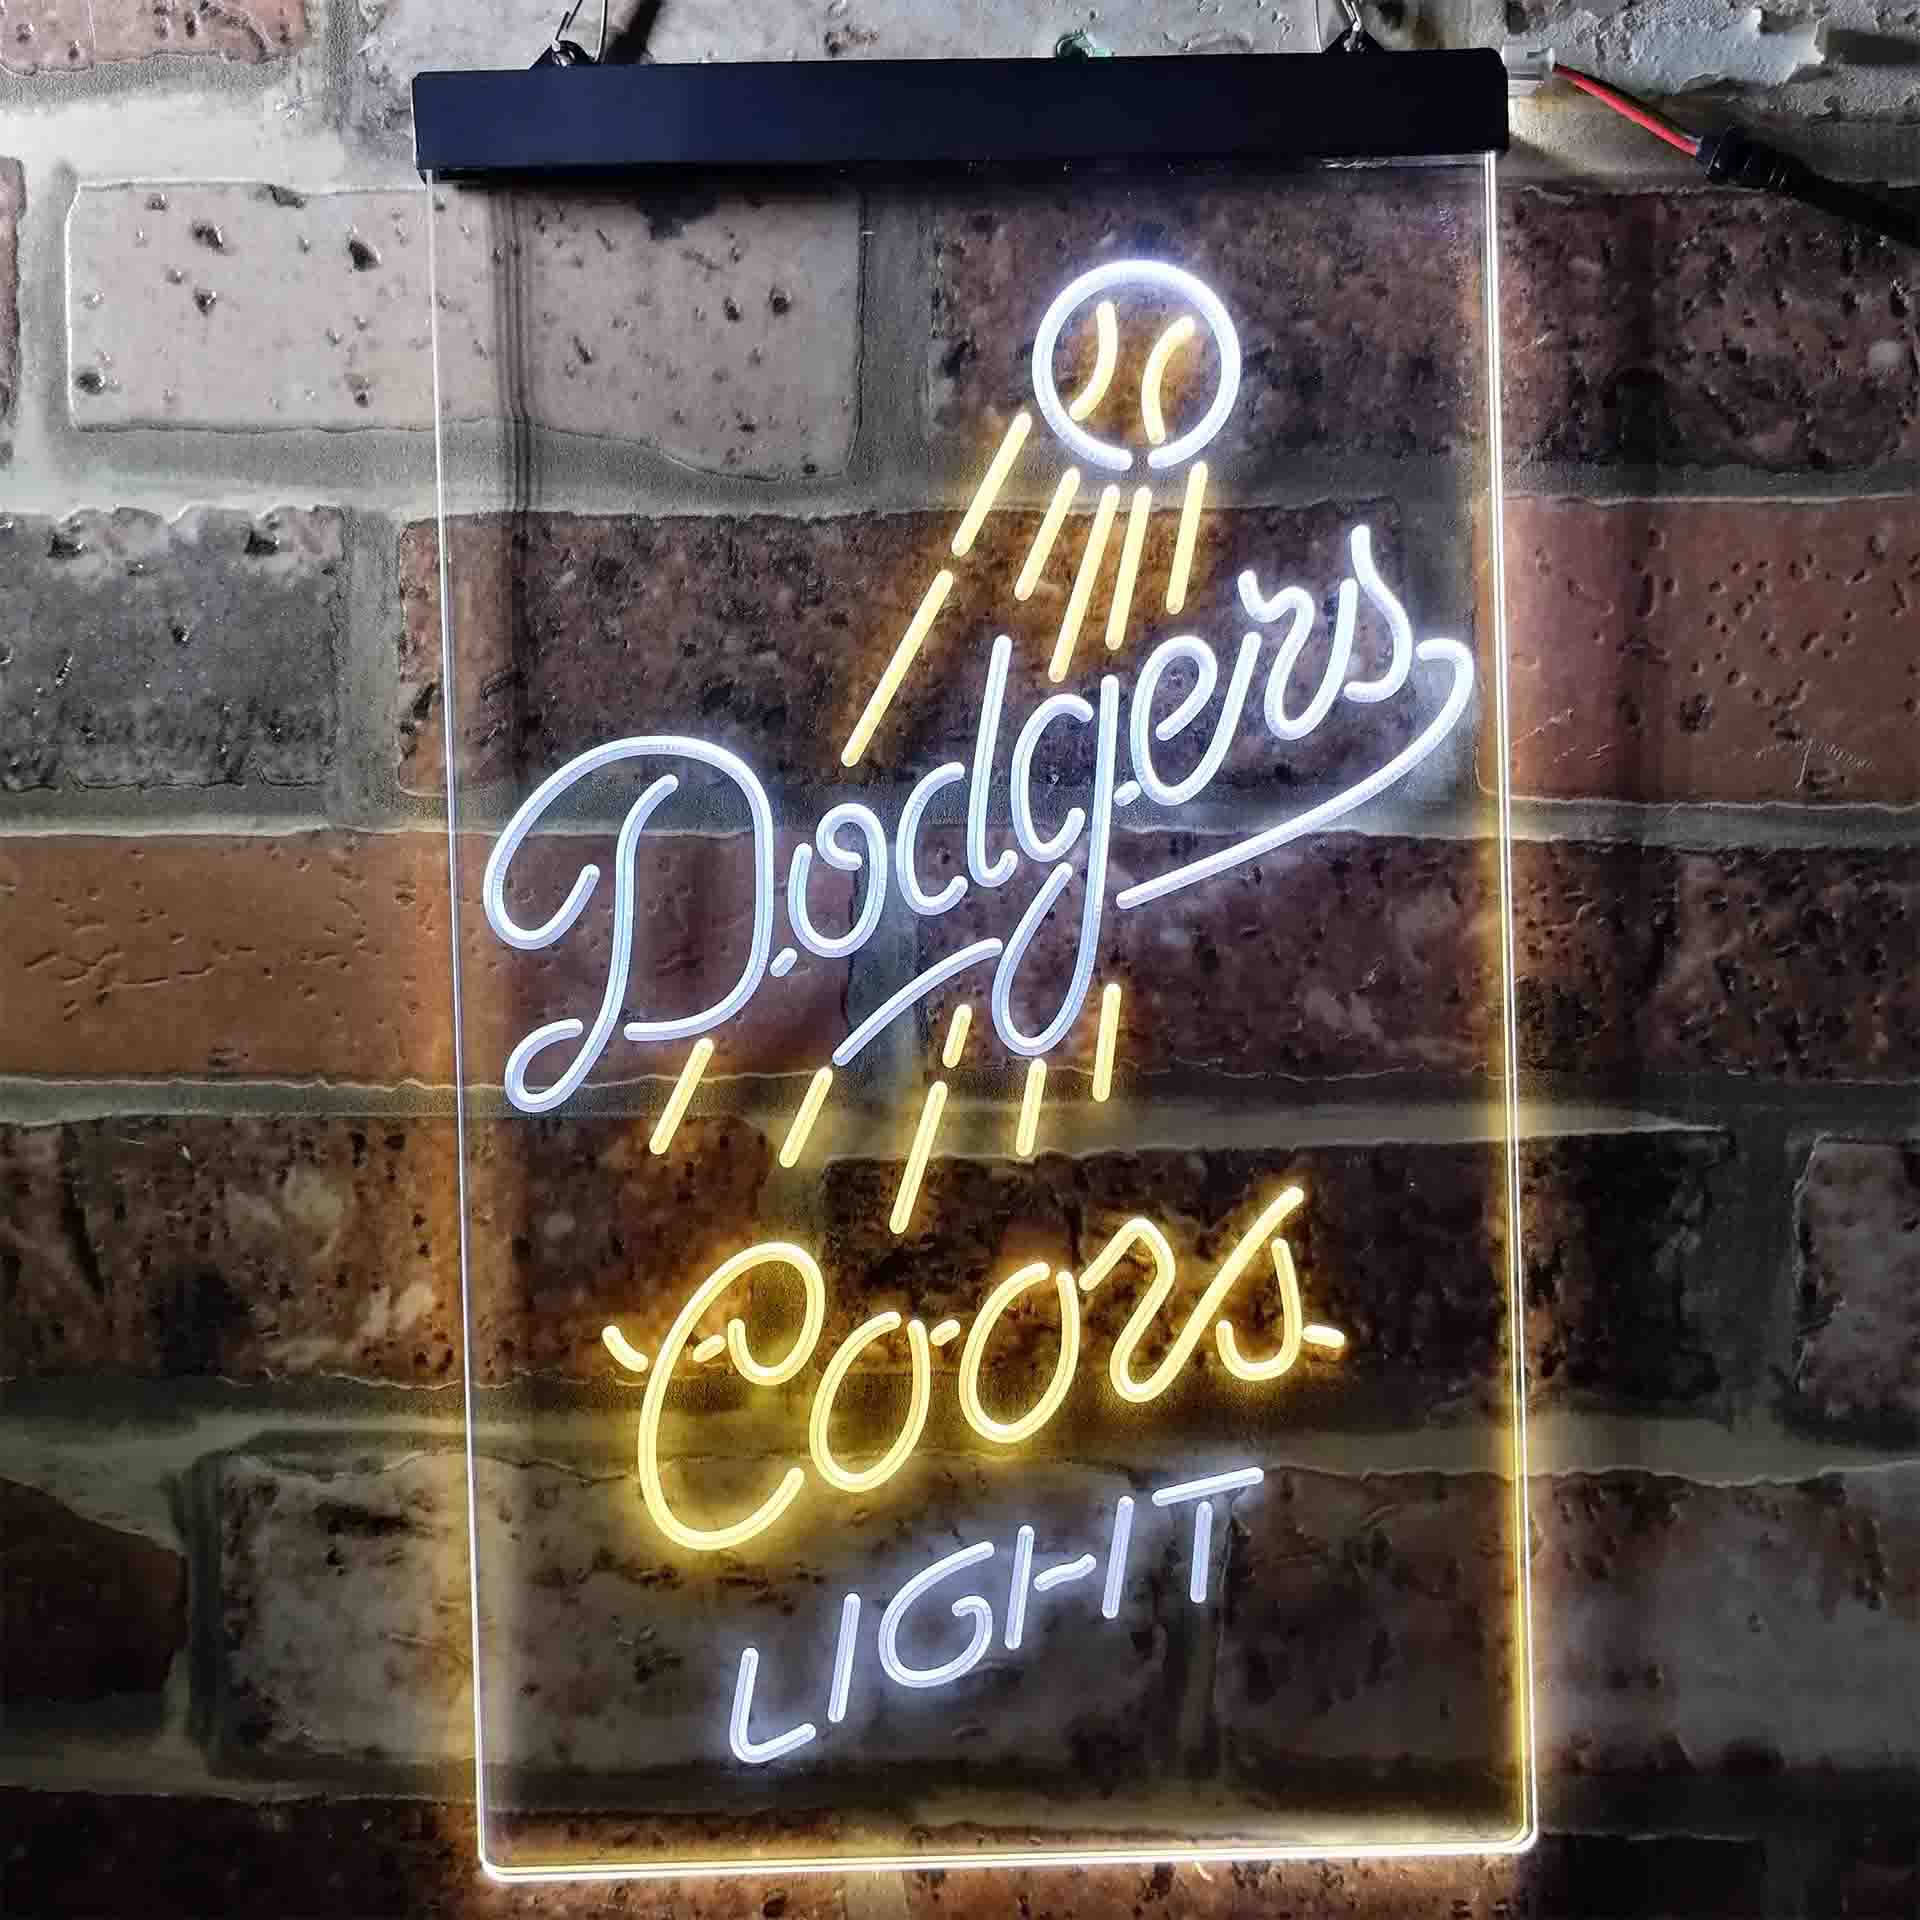 Los Angeles Dodgers Coors Light LED Neon Sign